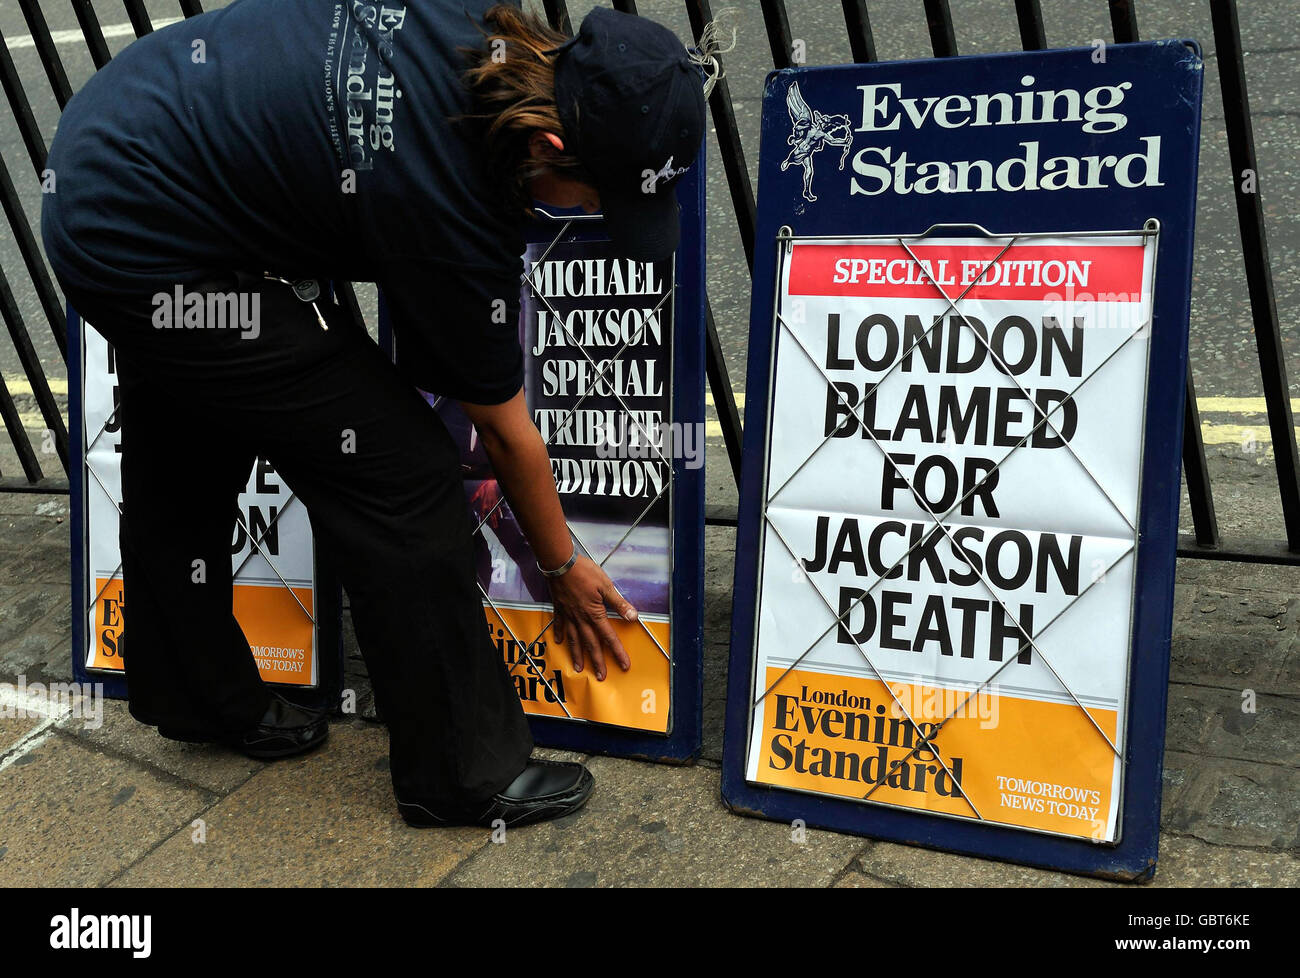 Evening Standard headlines in London following the death of the King of Pop Michael Jackson. Stock Photo